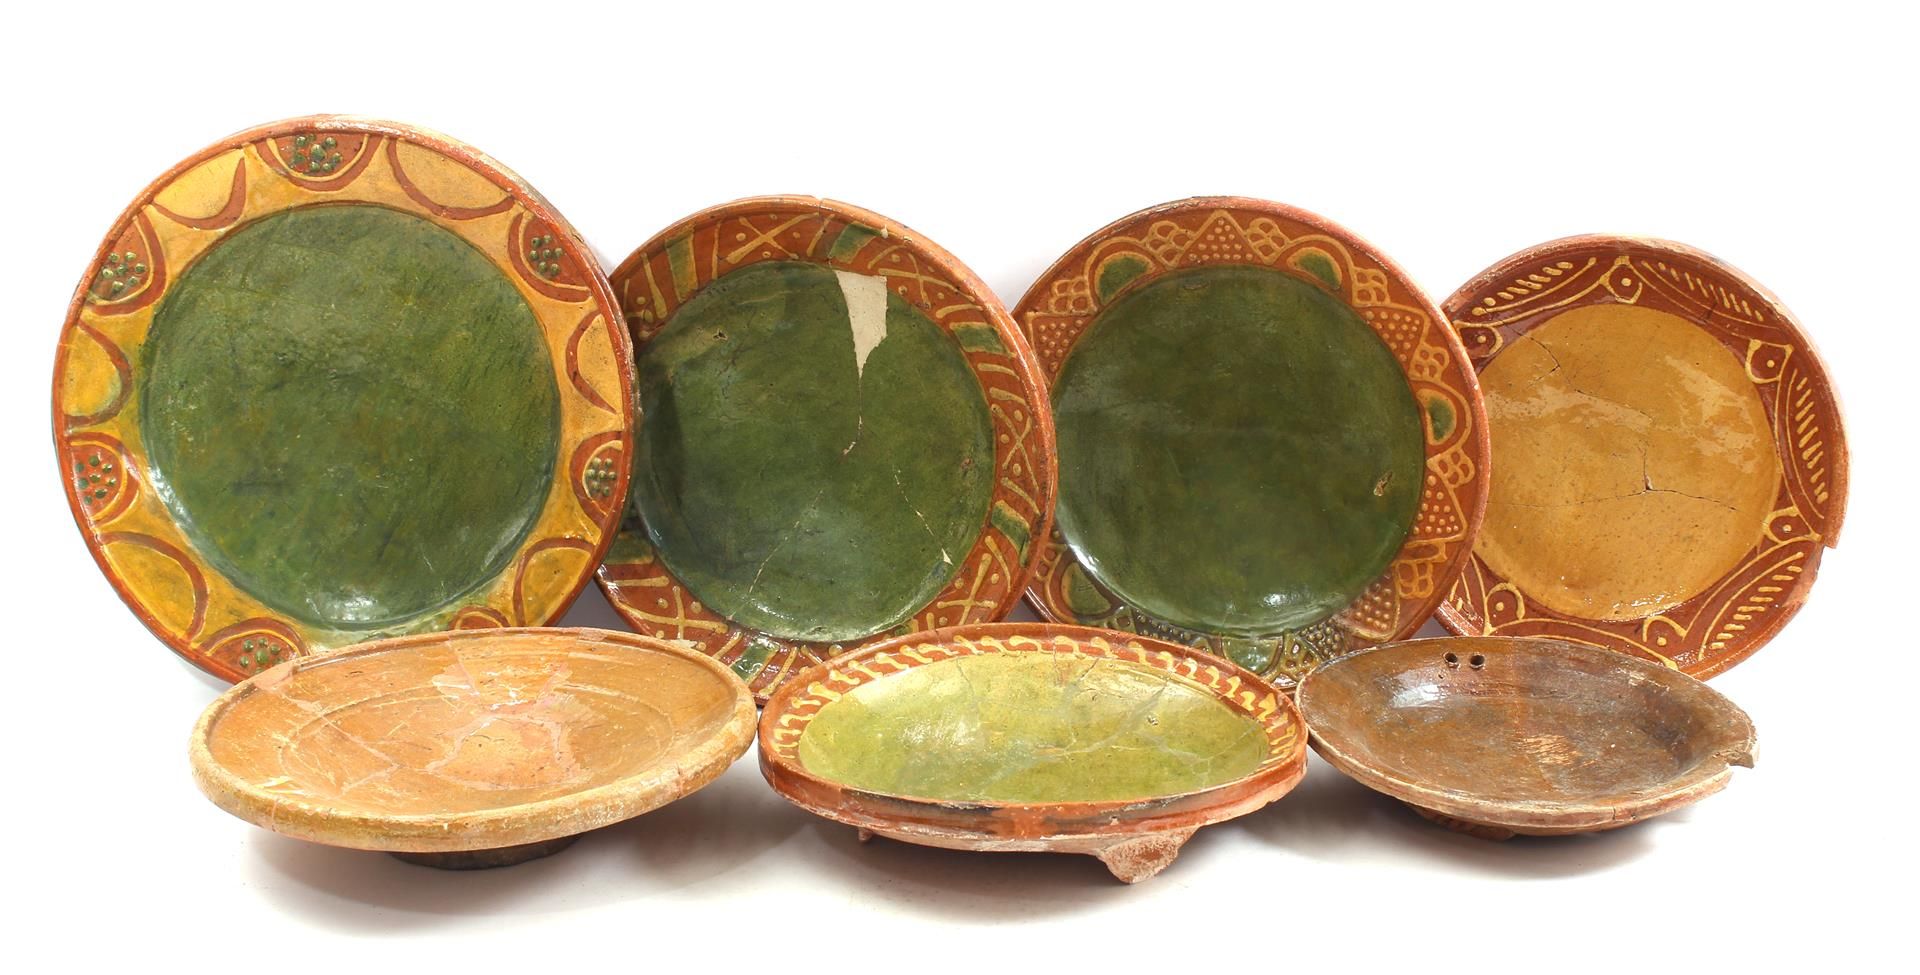 Lot earthenware dishes